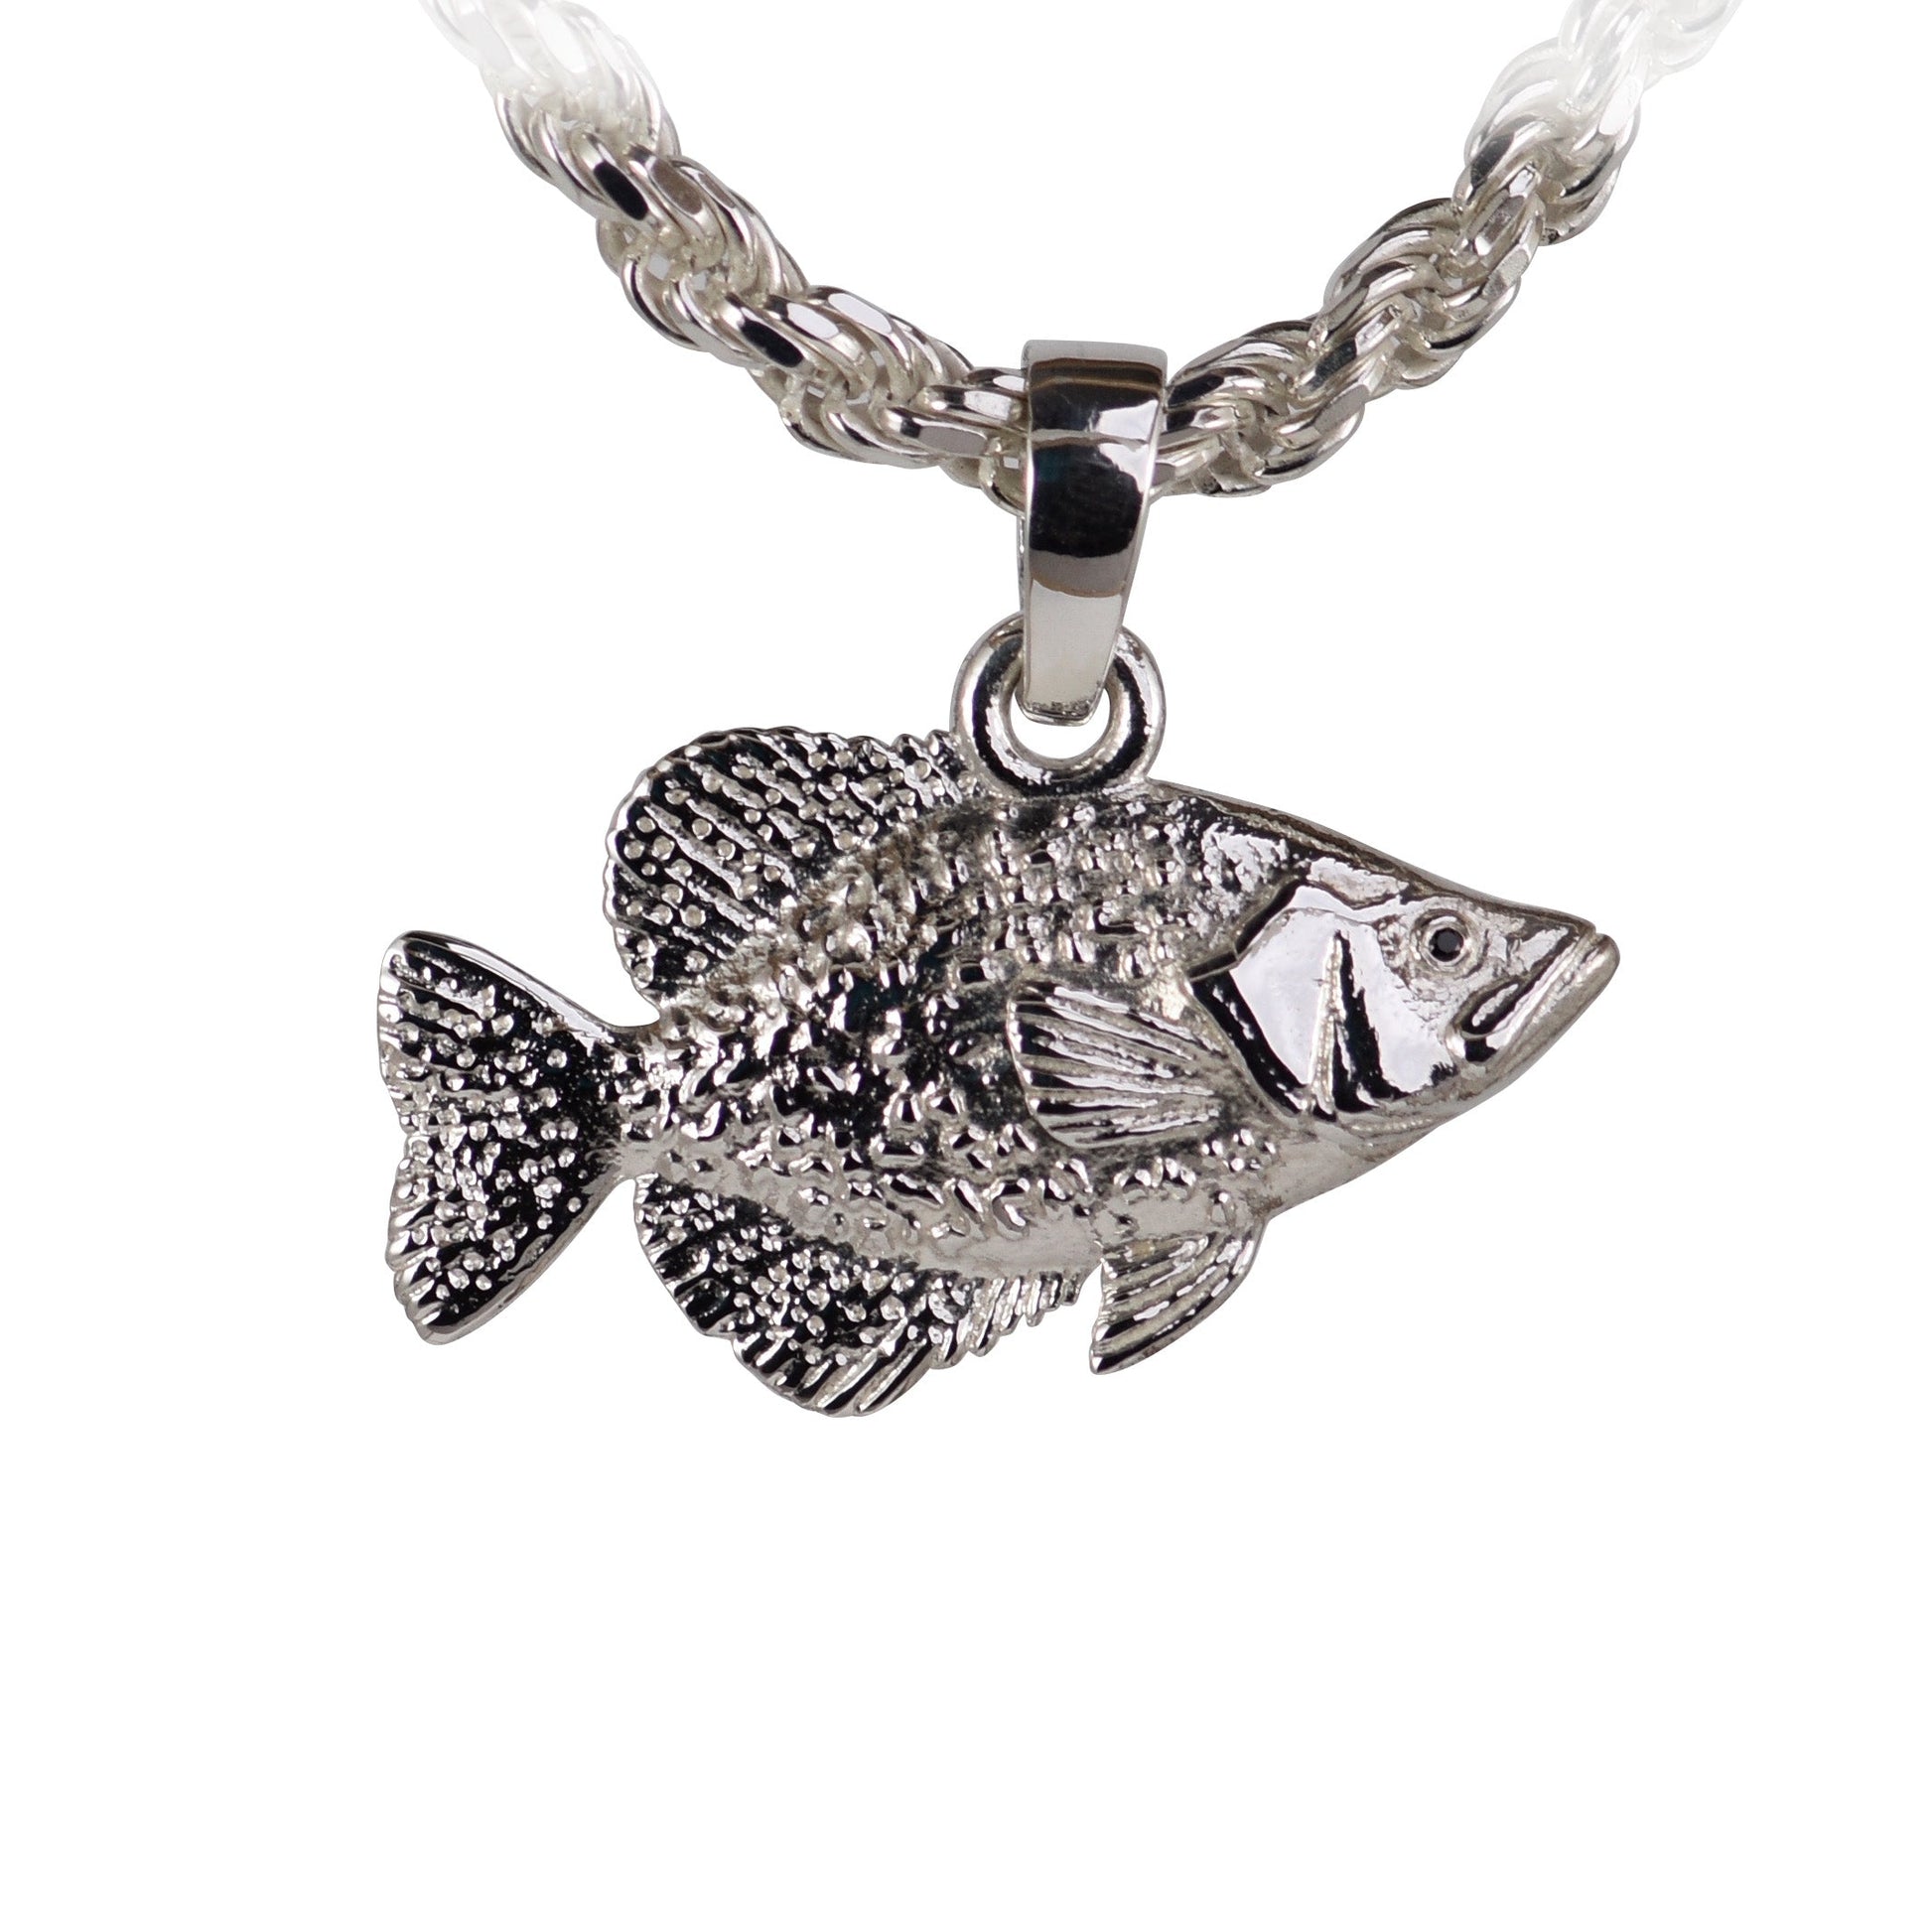 Crappie Fish Pendant - Large | Sea Shur Jewelry Sterling Silver w/ Large Bail